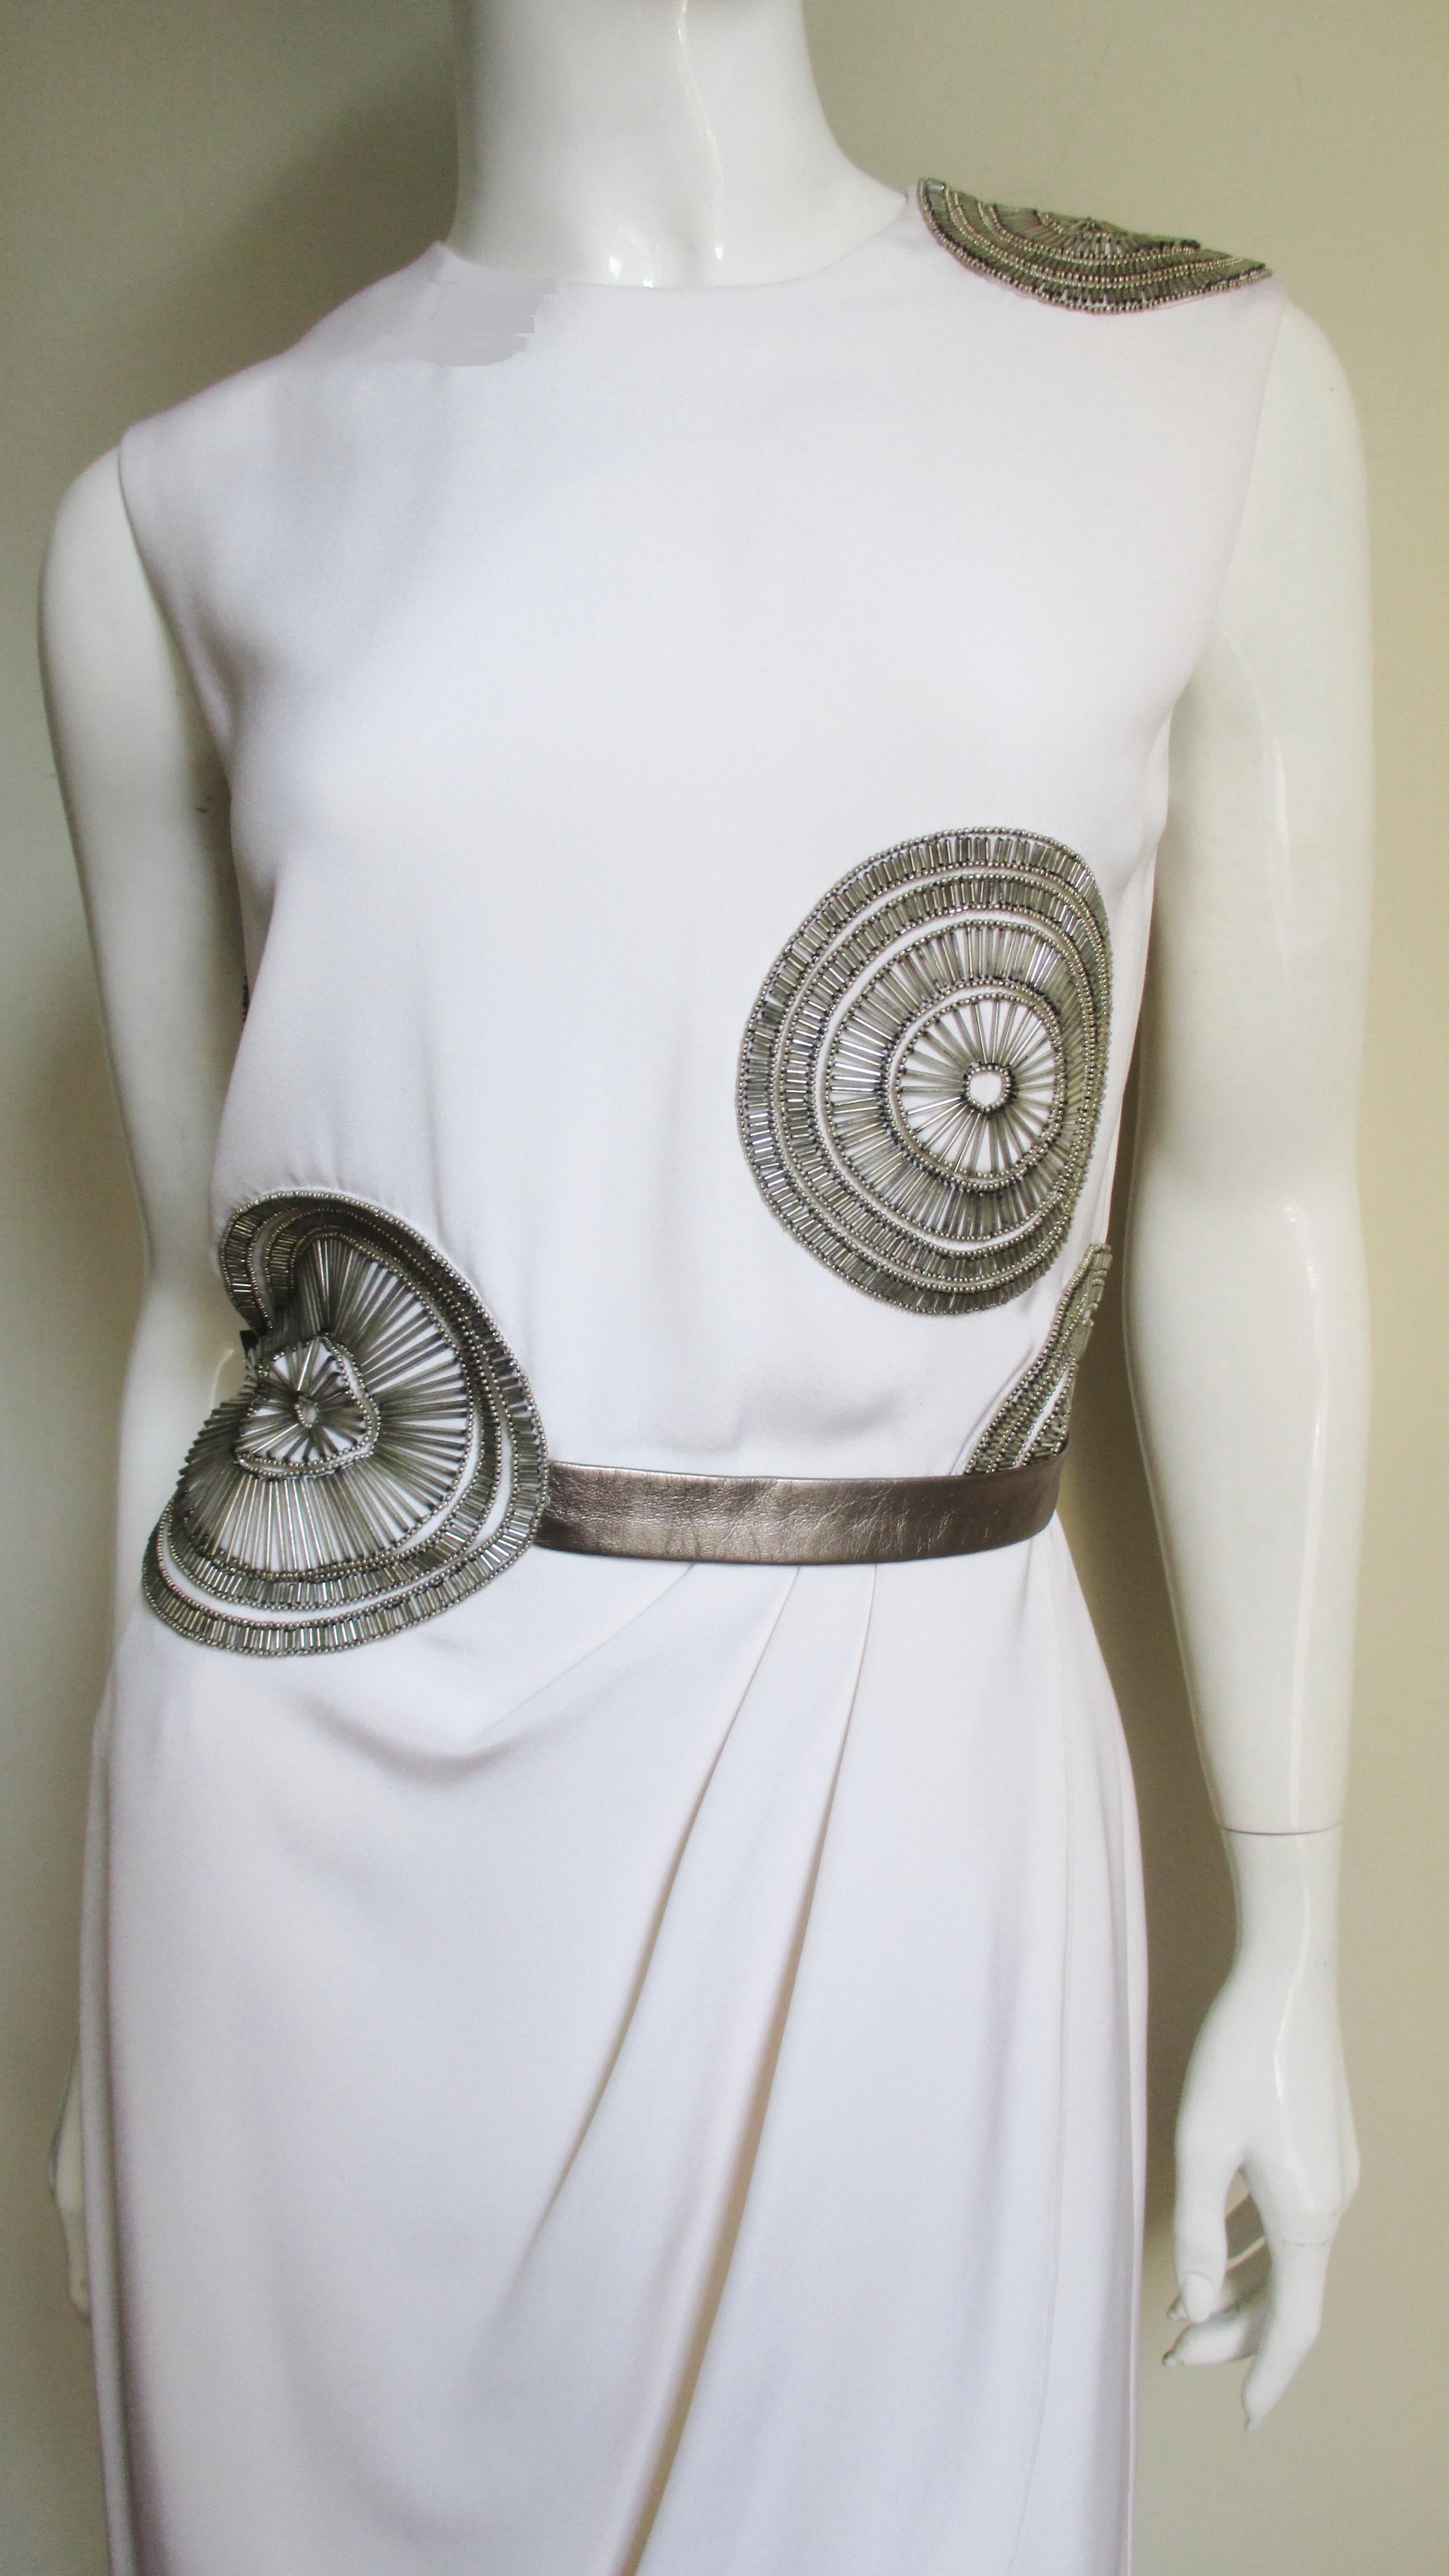 A beautiful white silk dress with elaborately detailed silver glass tubular and gold seed beaded circles on the bodice by Bill Blass. The dress is sleeveless with a bronze leather belt and straight skirt which overlaps and drapes in the front.  It